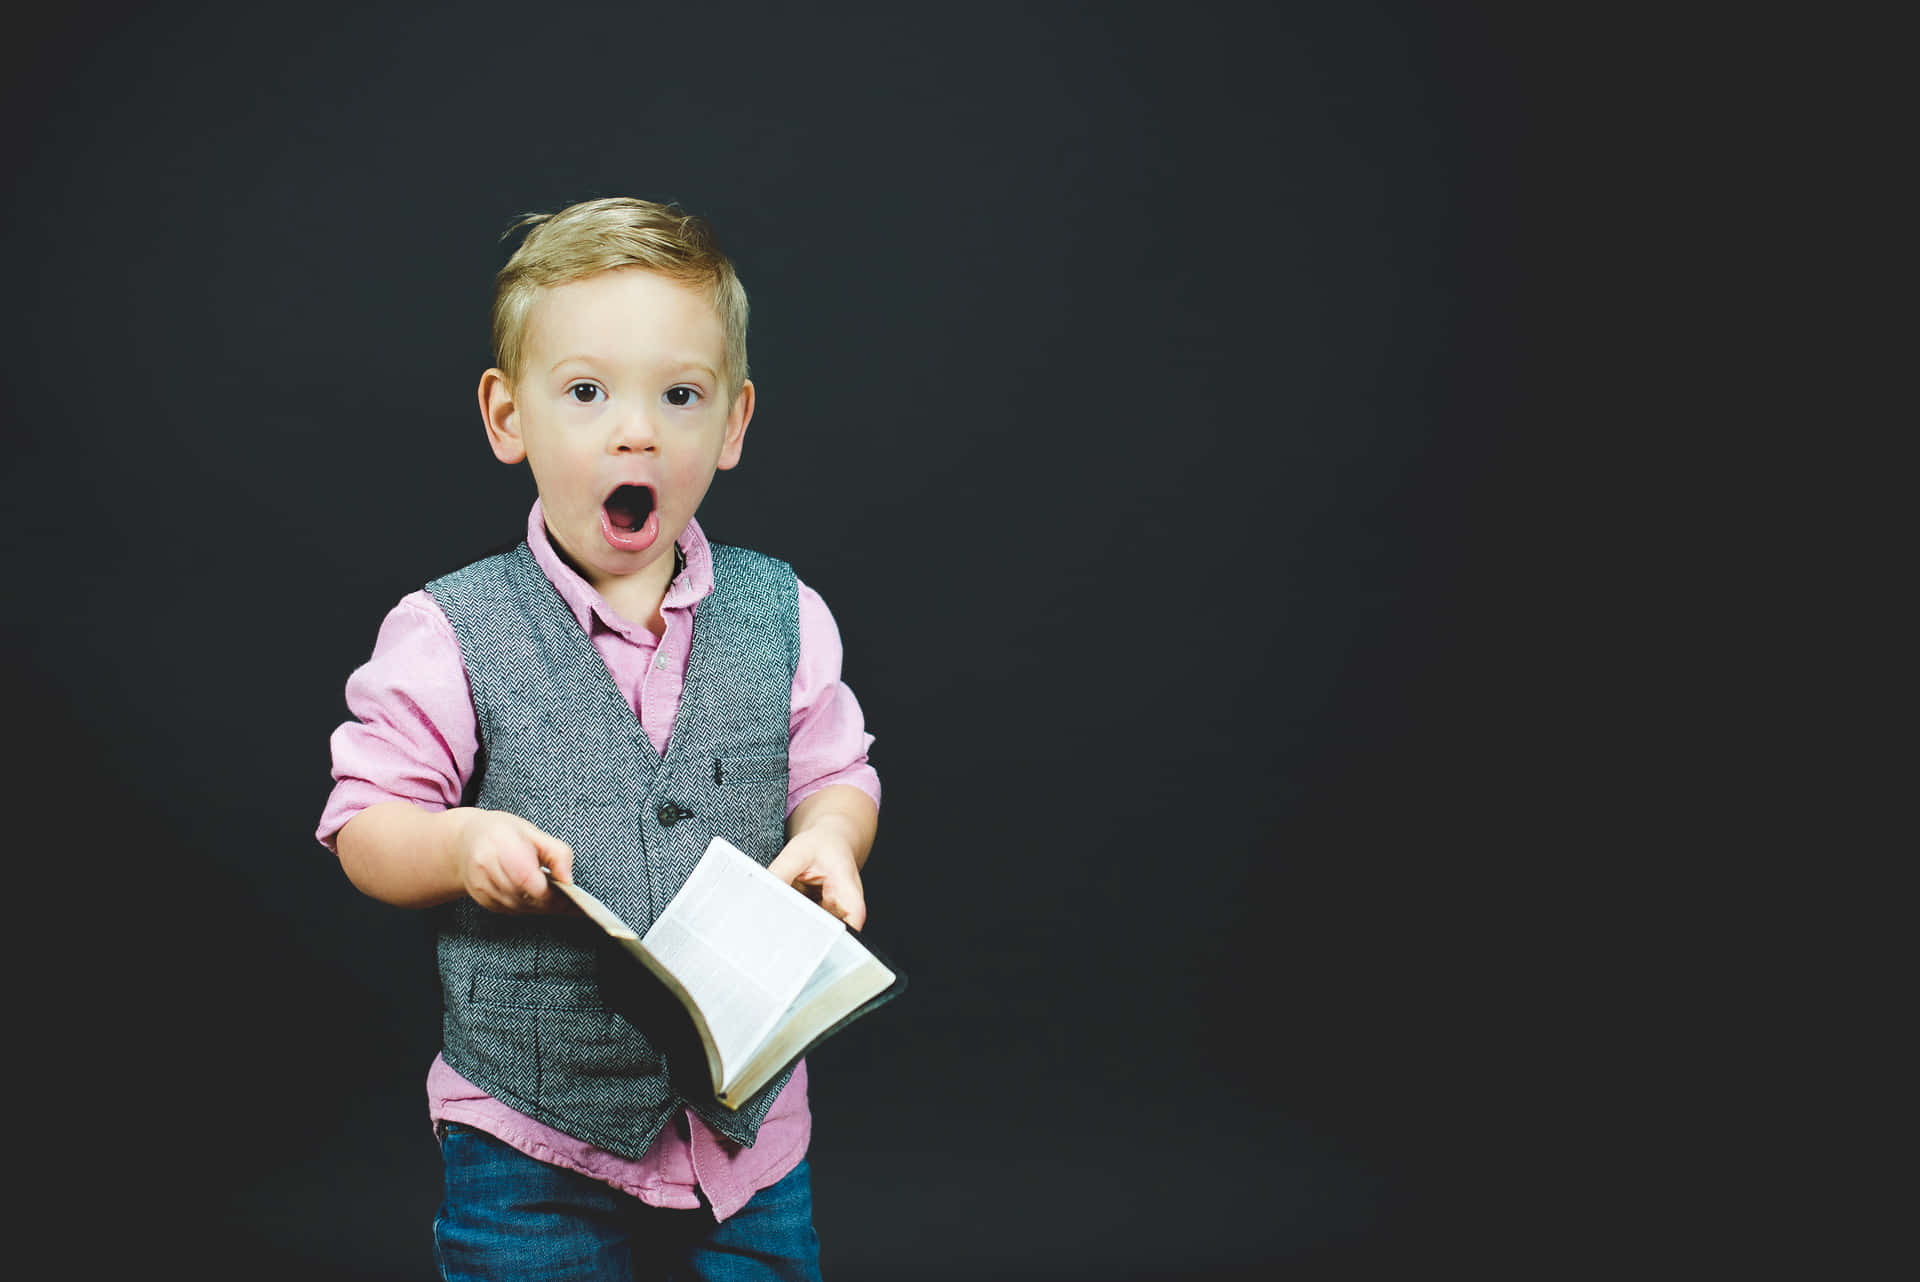 A Young Boy Holding A Book And Looking Surprised Wallpaper